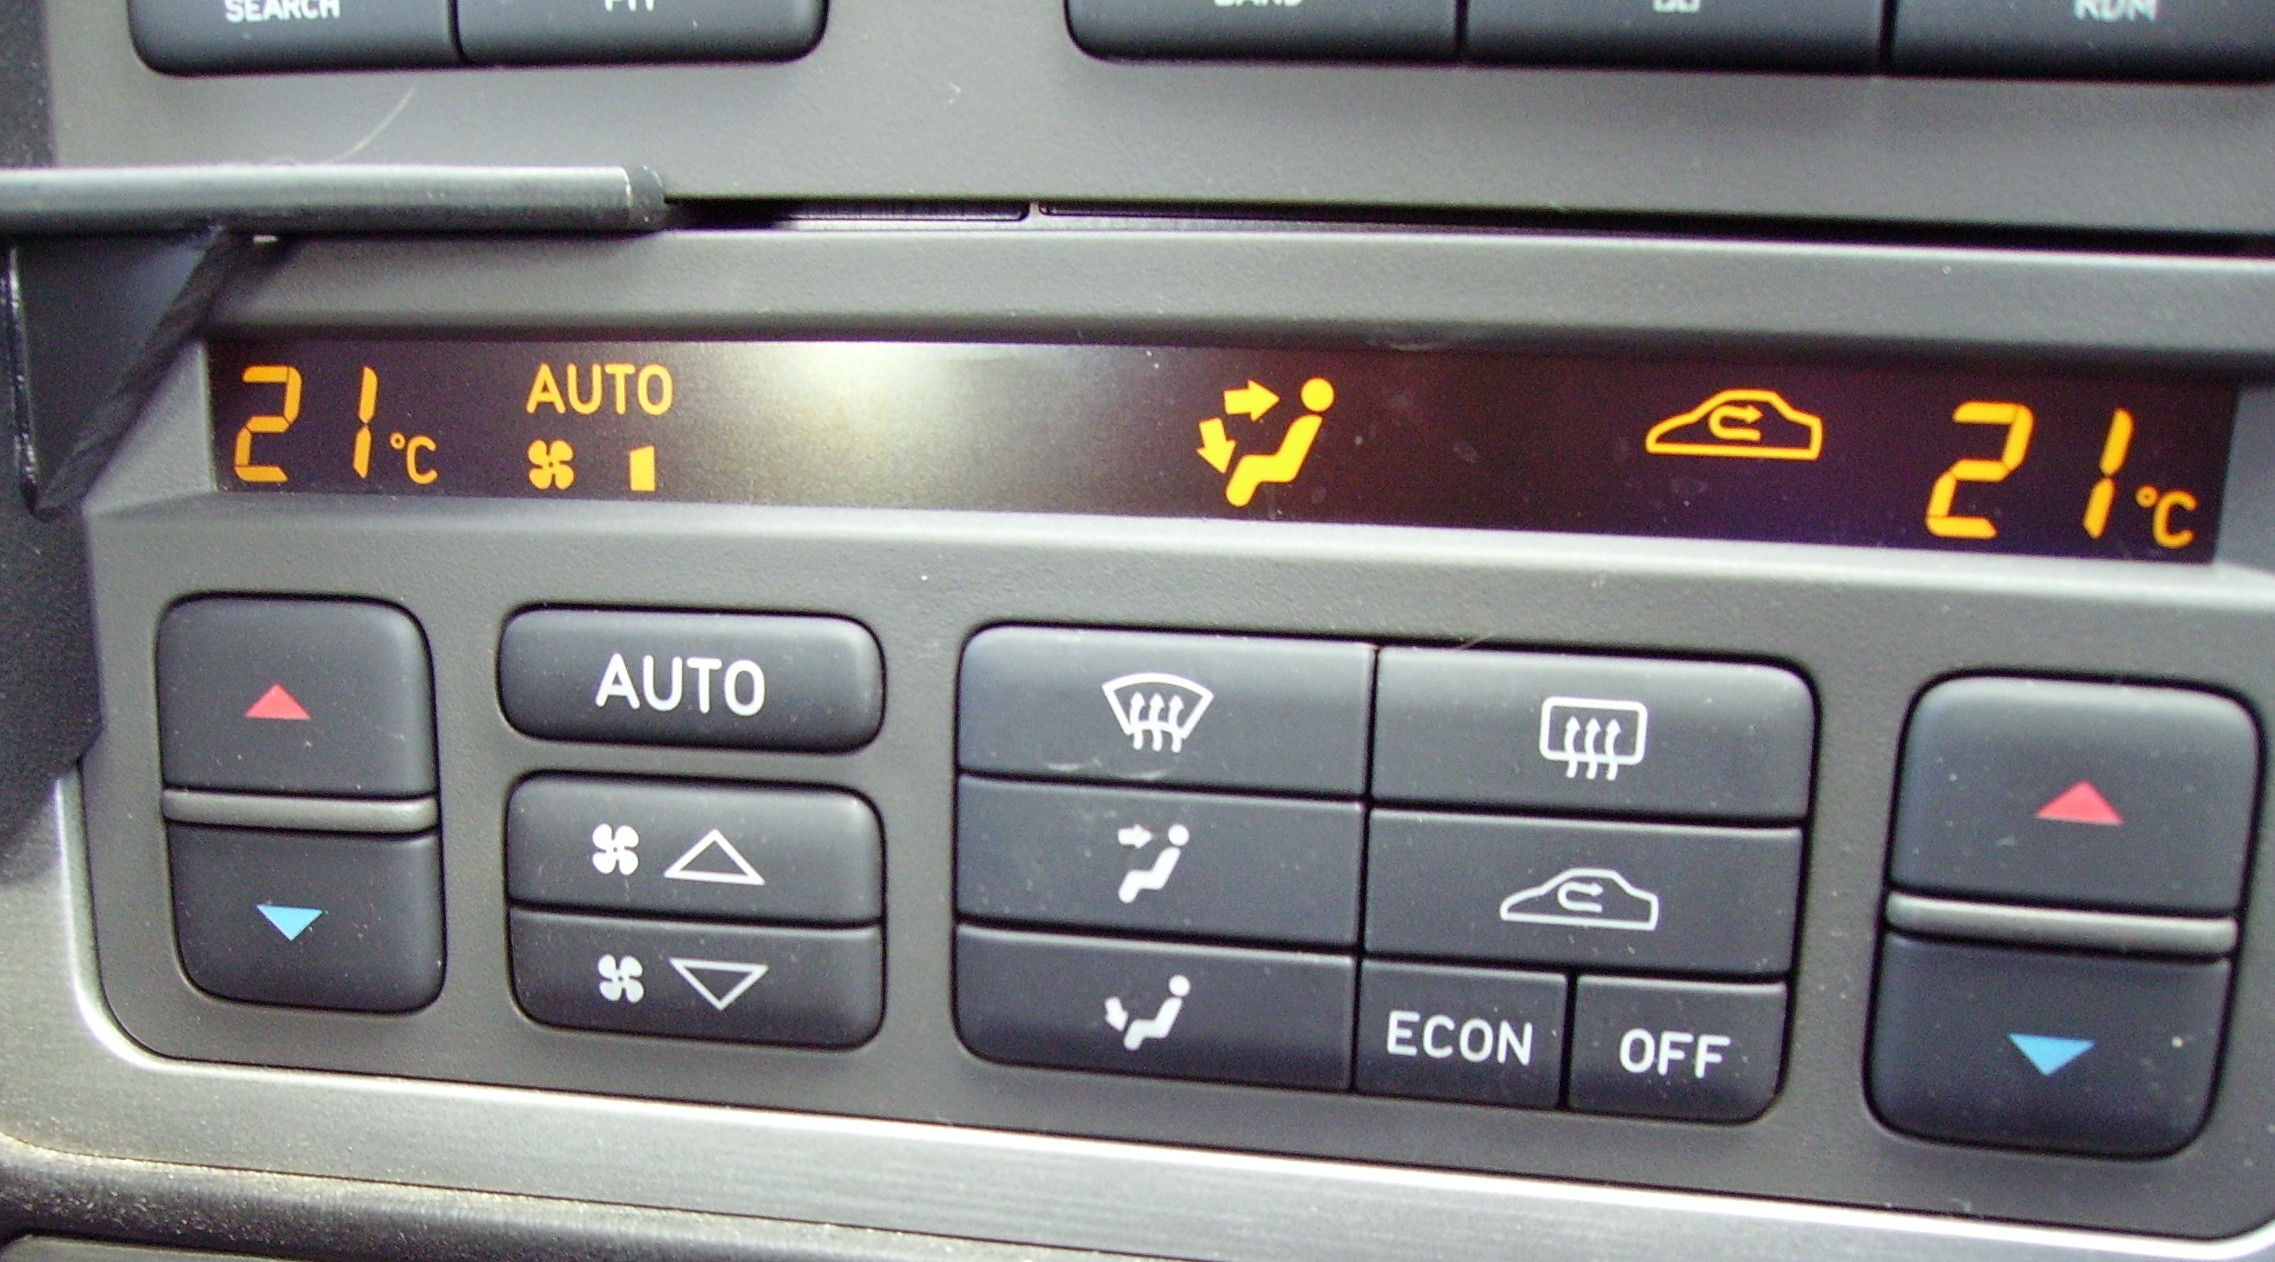 Climate control is a feature on high-end cars